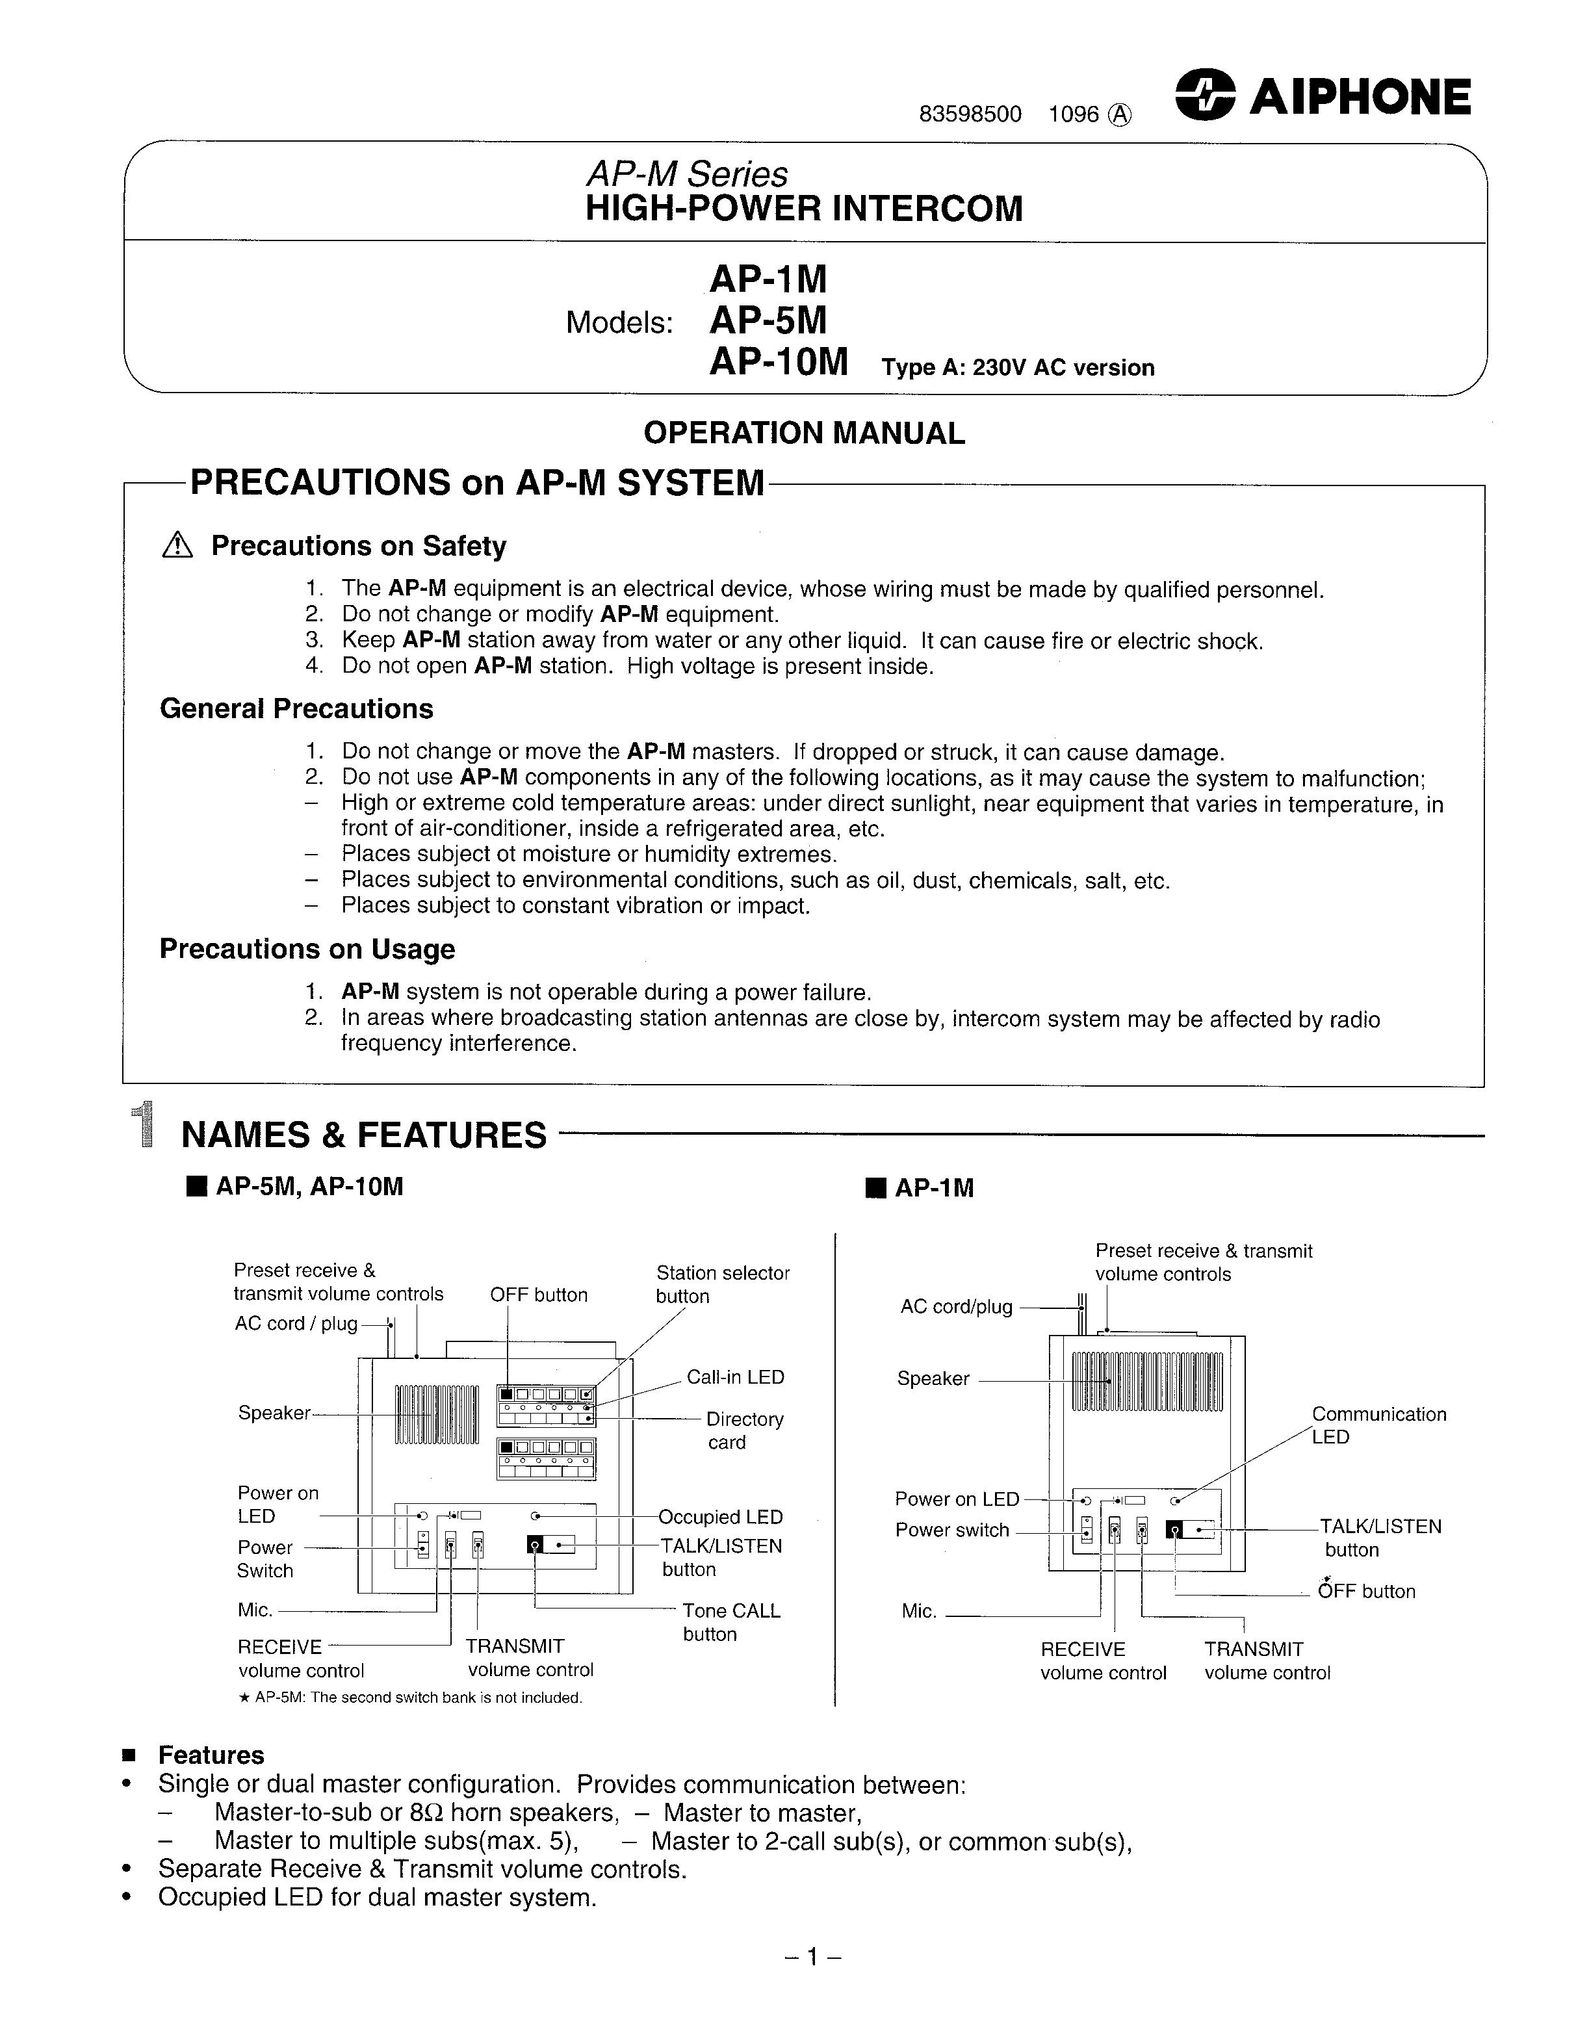 Aiphone AP-5M Home Security System User Manual